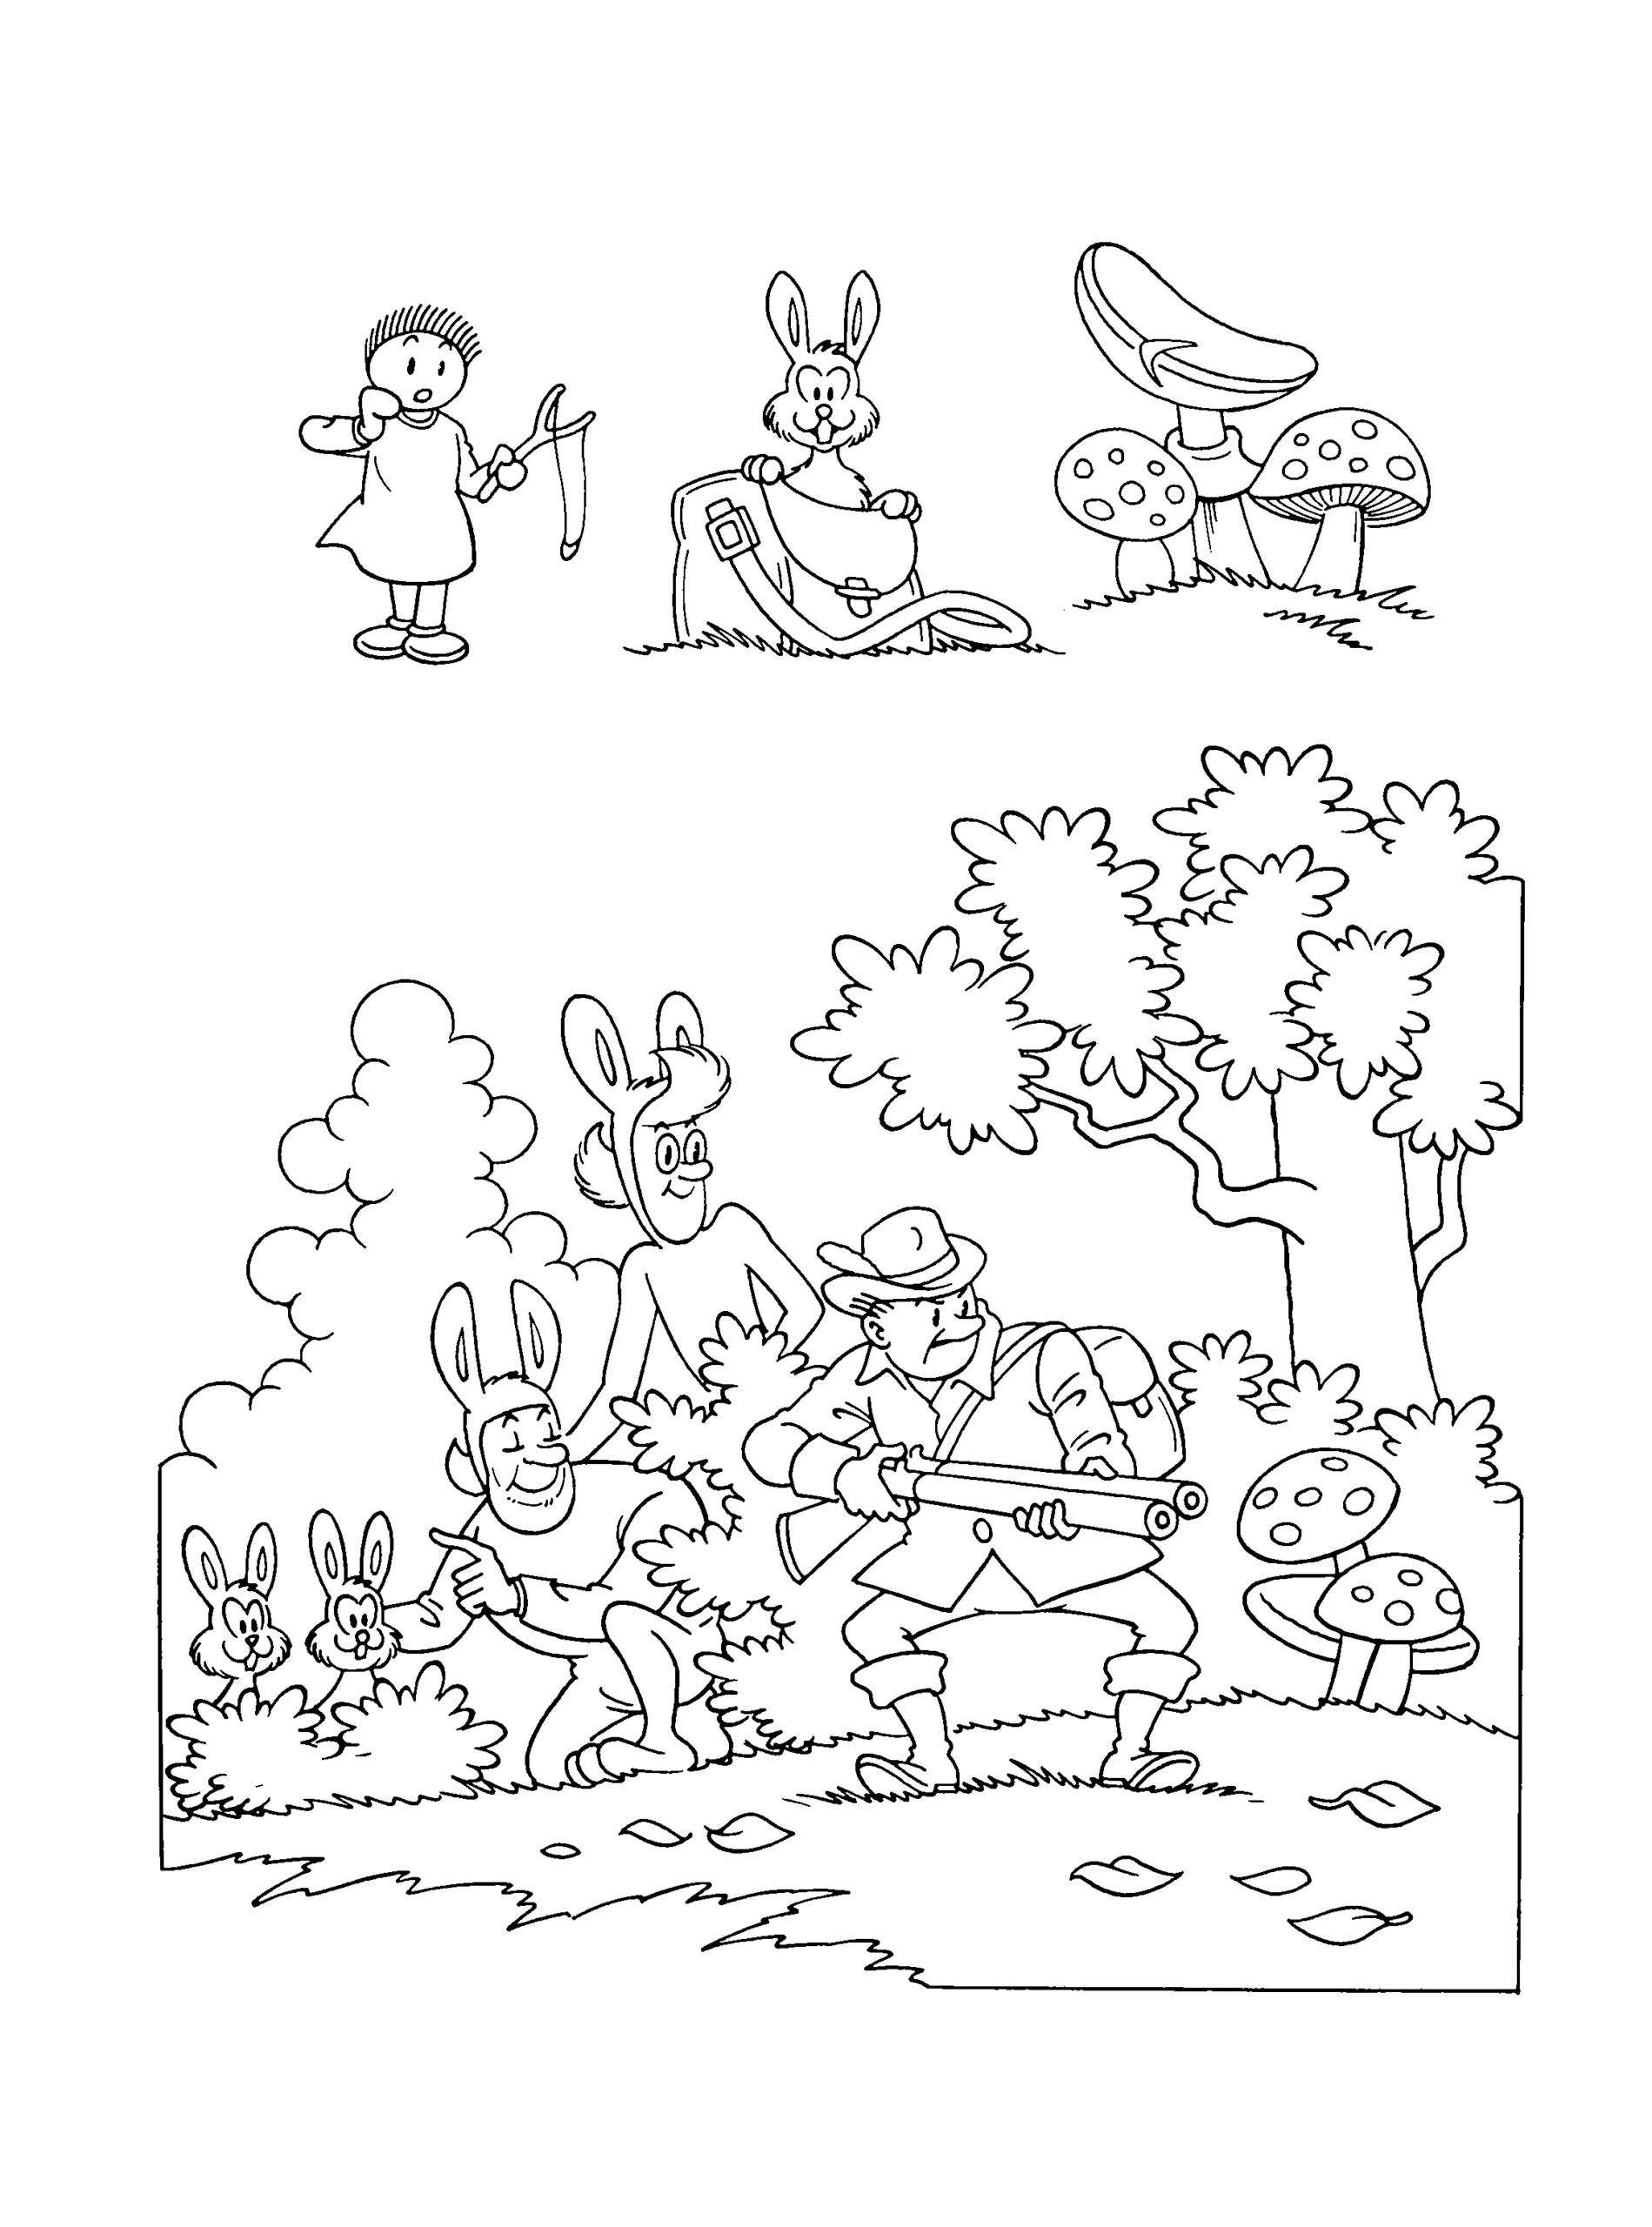 Spike and Suzy Coloring Pages Cartoons spike and suzy 26 Printable 2020 5913 Coloring4free